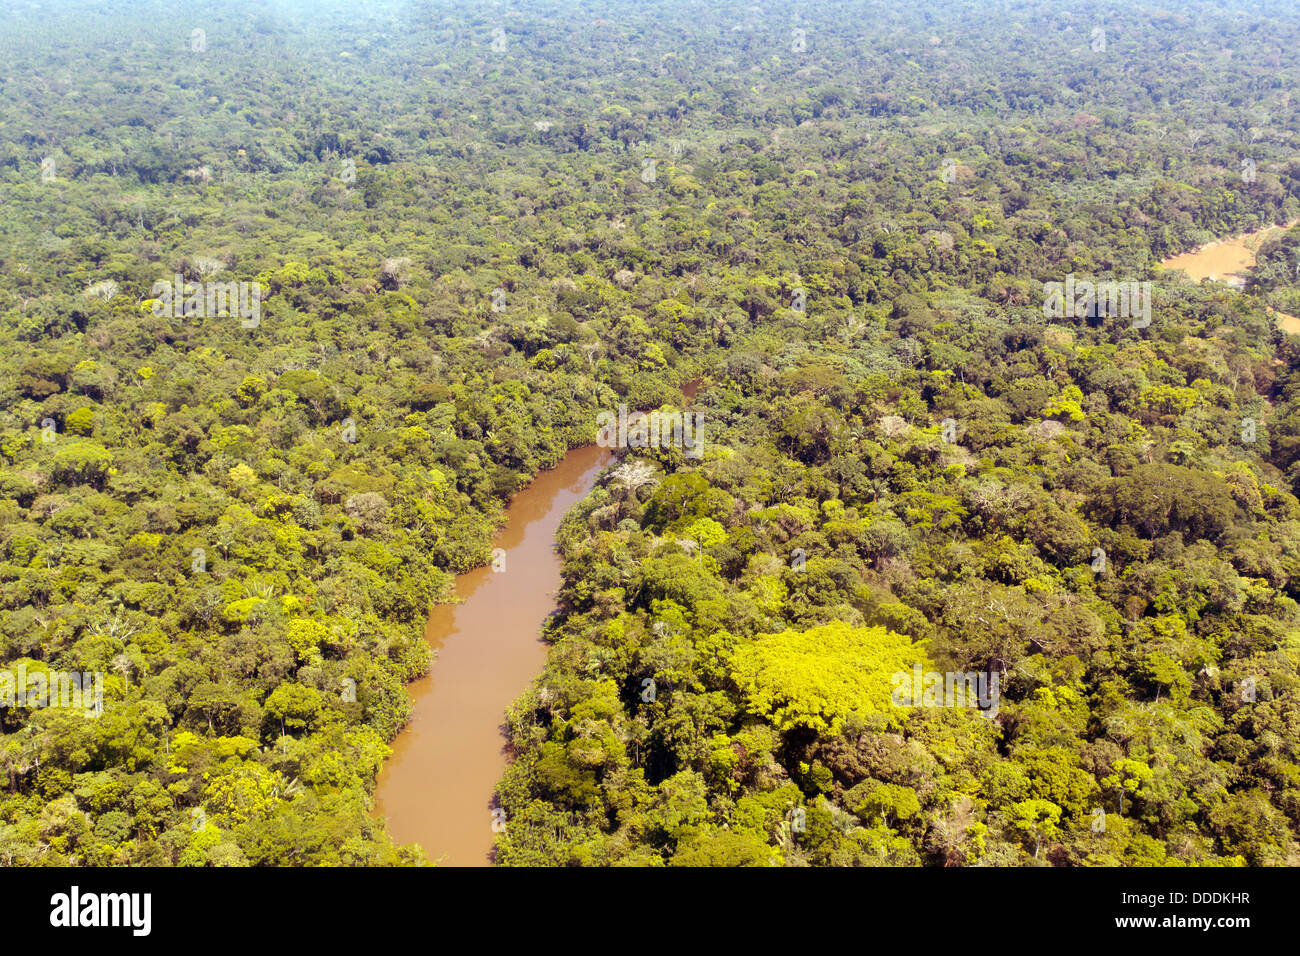 Aerial view of Rio Cononaco in the Ecuadorian Amazon with a huge emergent Ceibo tree in the foreground Stock Photo